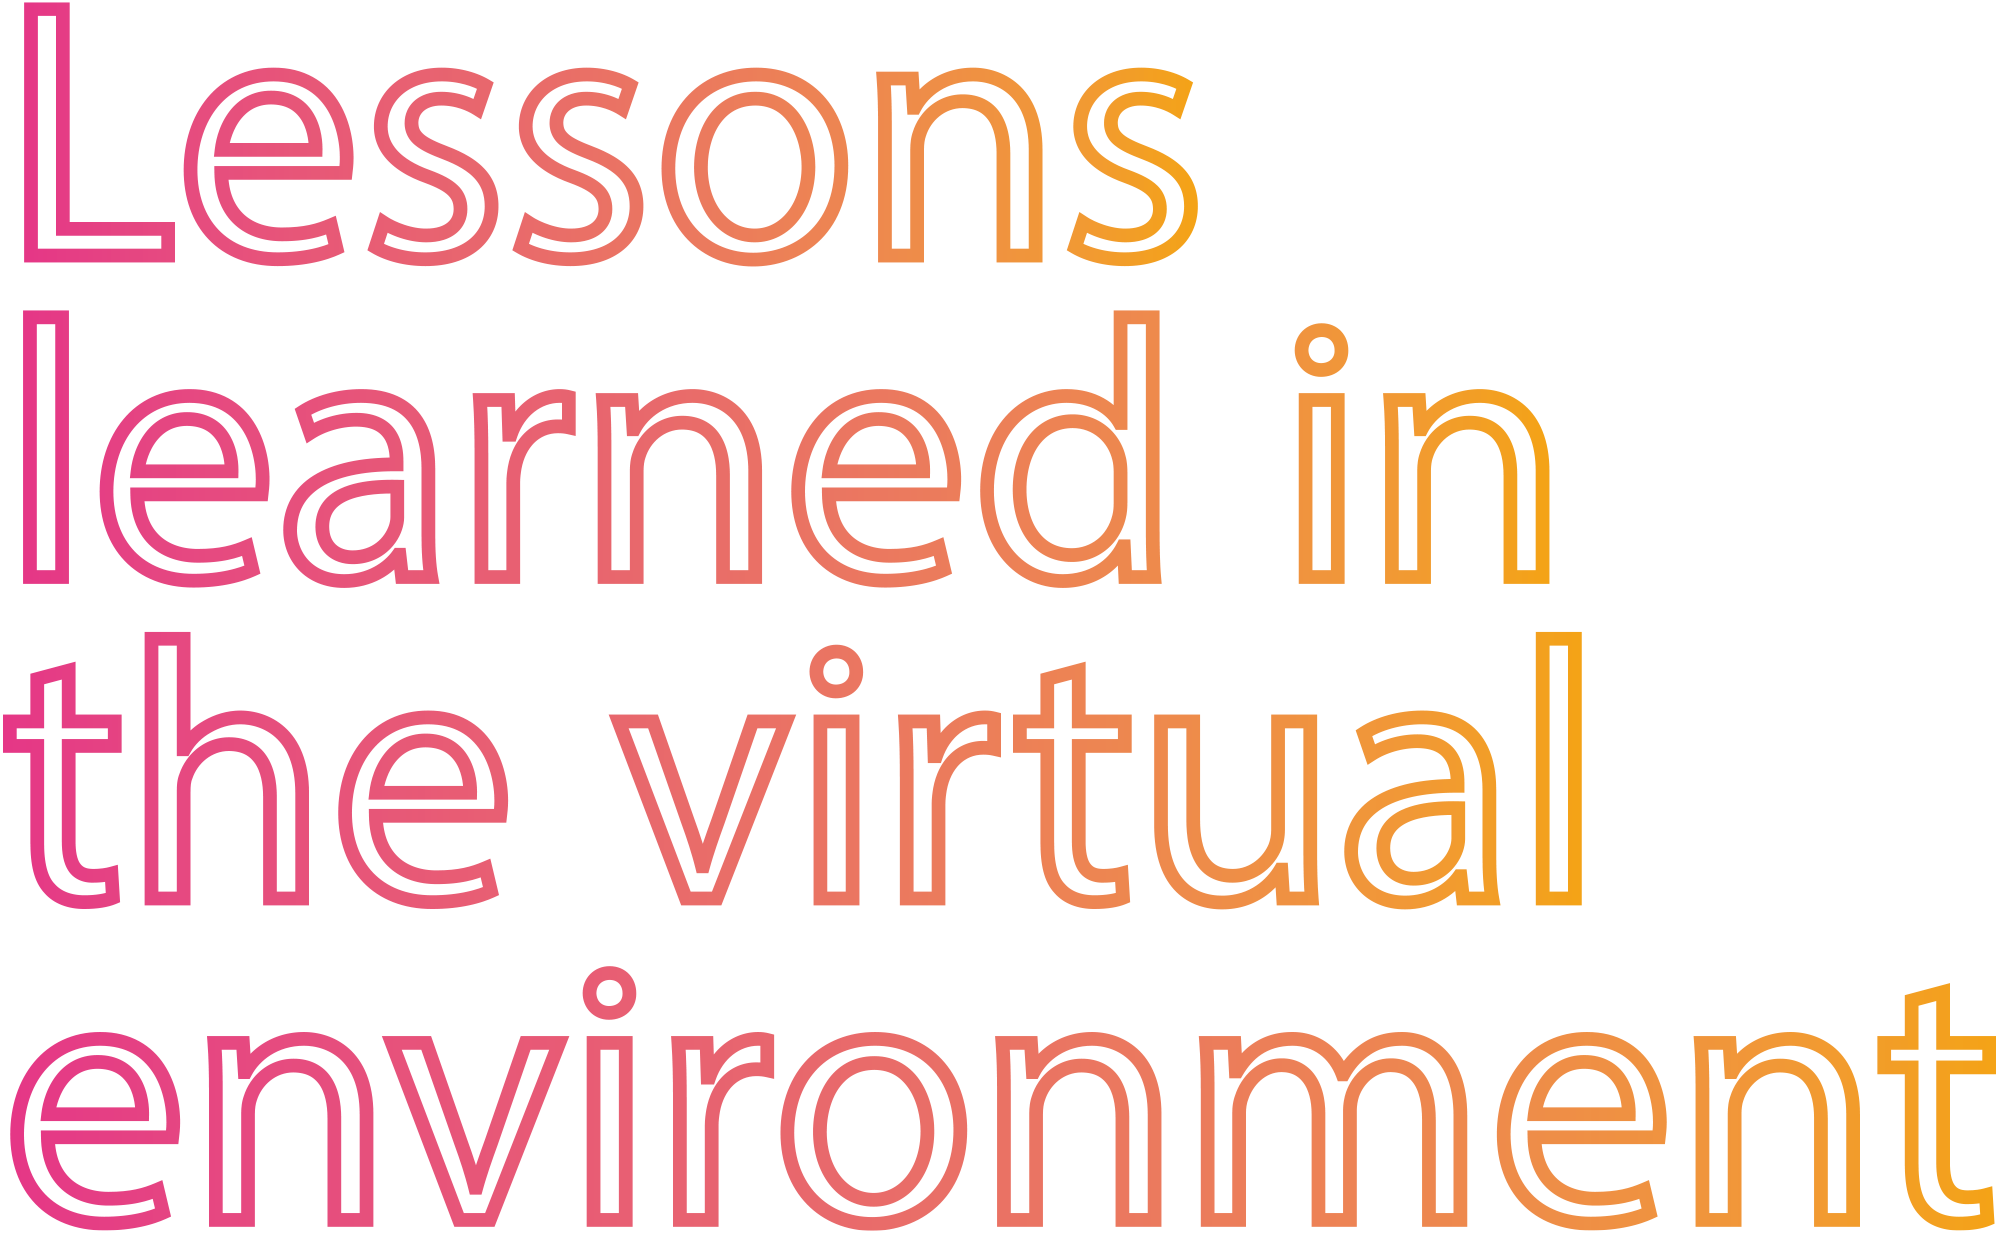 Lessons learned in the virtual environment typography